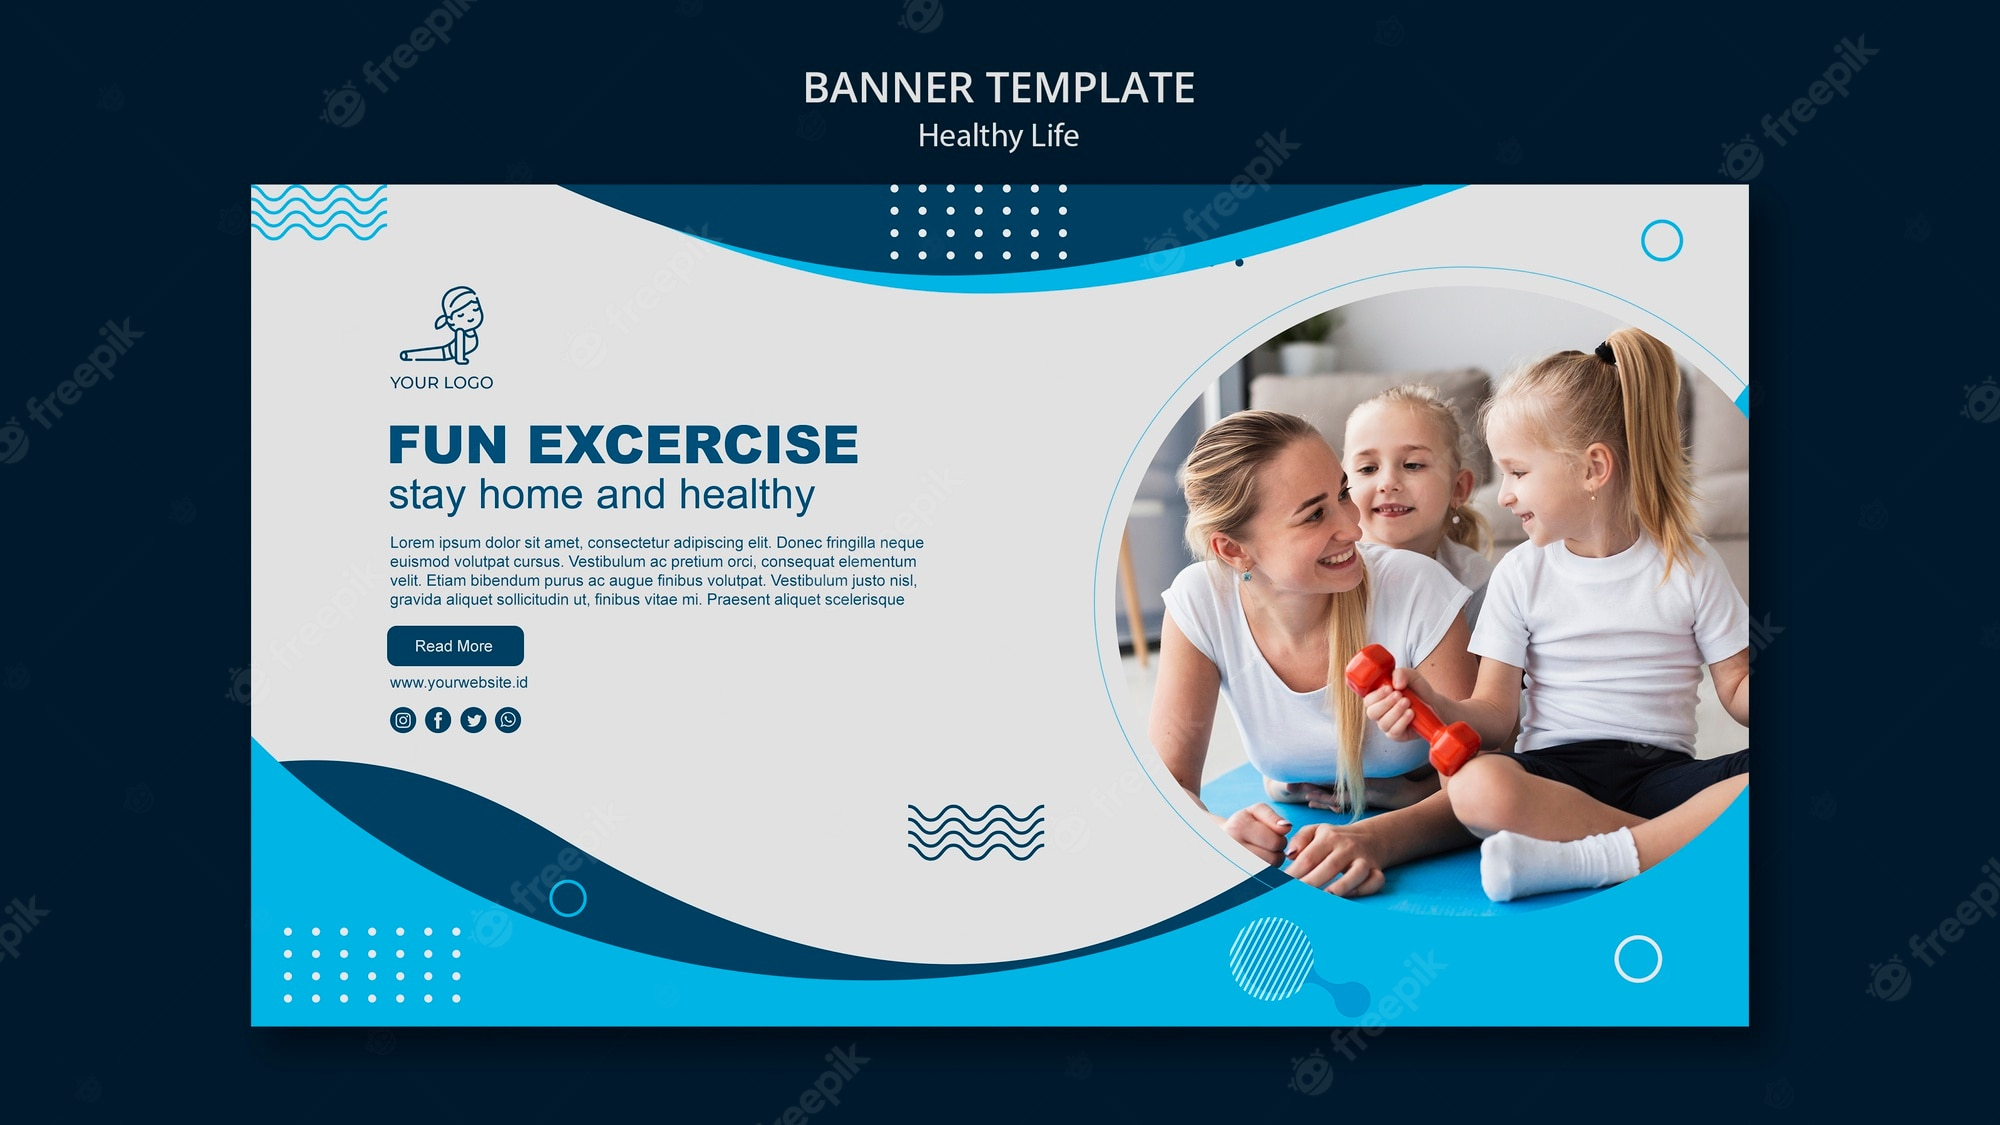 Banner Design PSD, 10,10+ High Quality Free PSD Templates for